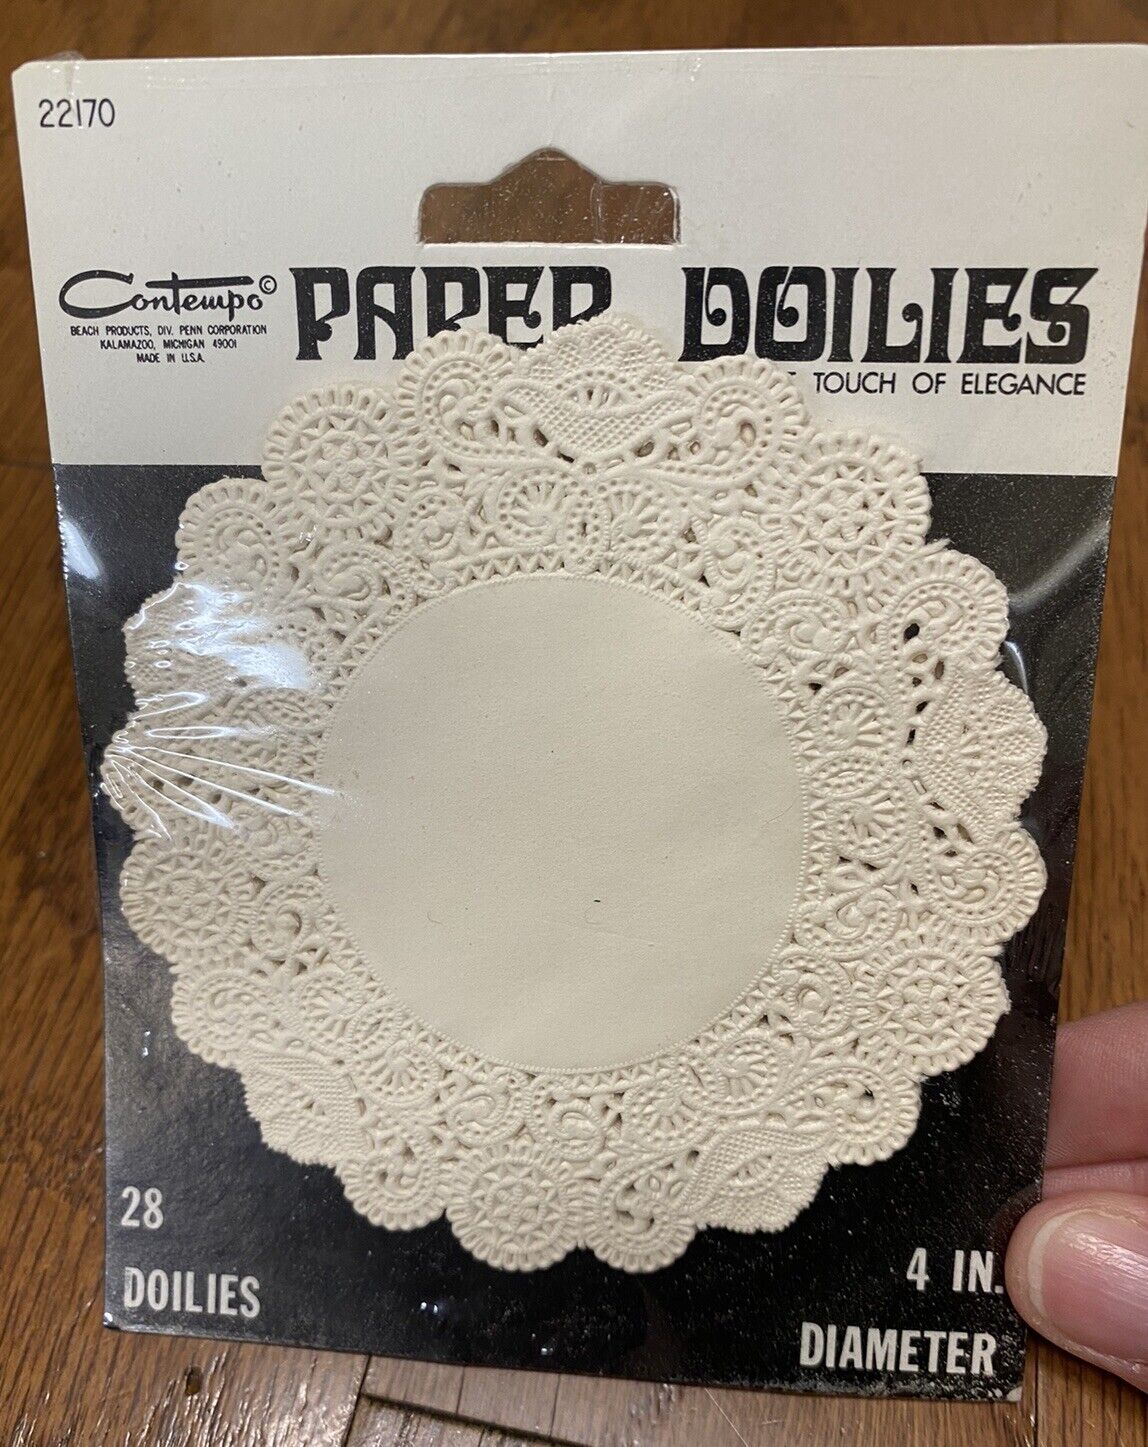 Vintage Contempo Pack of 28 - 4” Paper Doilies - Lace Paper #22170 NEW & SEALED